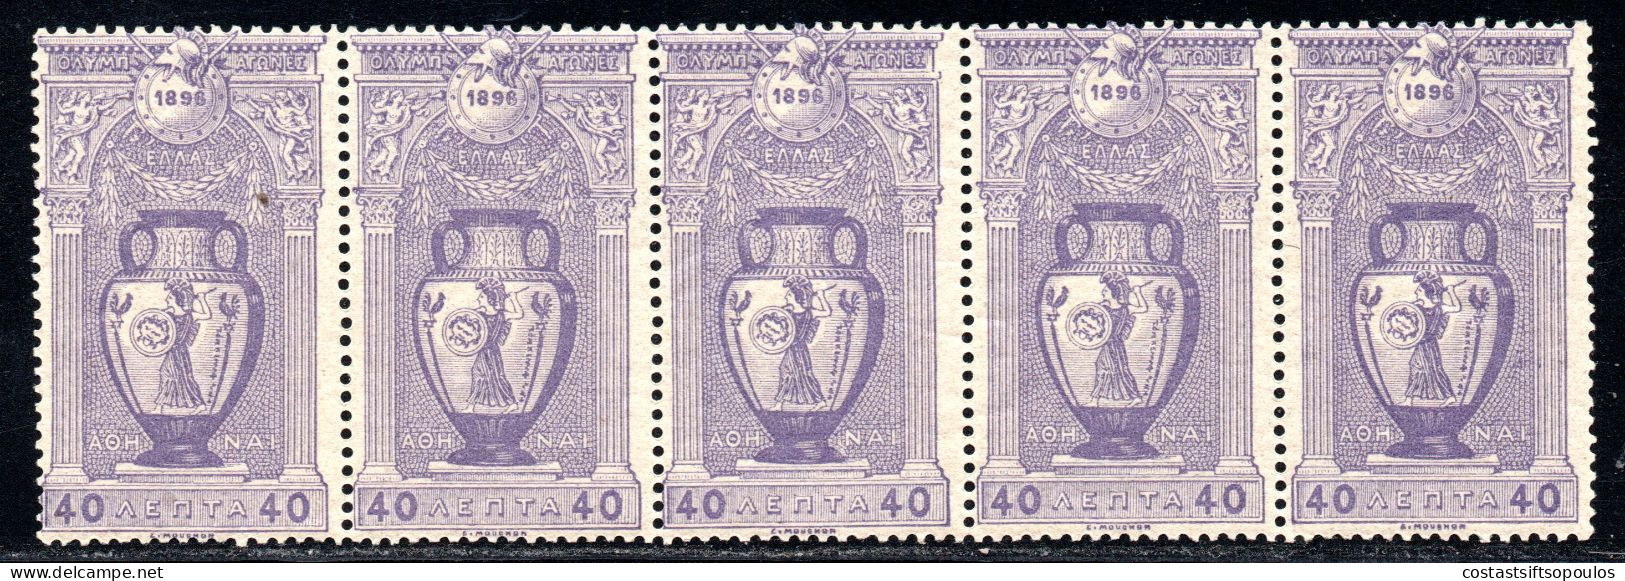 1544.GREECE.1896 OLYMPIC GAMES.40L.VASE,PALLA ATHENA,SC.123,HELLAS115 MNH STRIP OF 5,VERY FINE AND FRESH. - Neufs